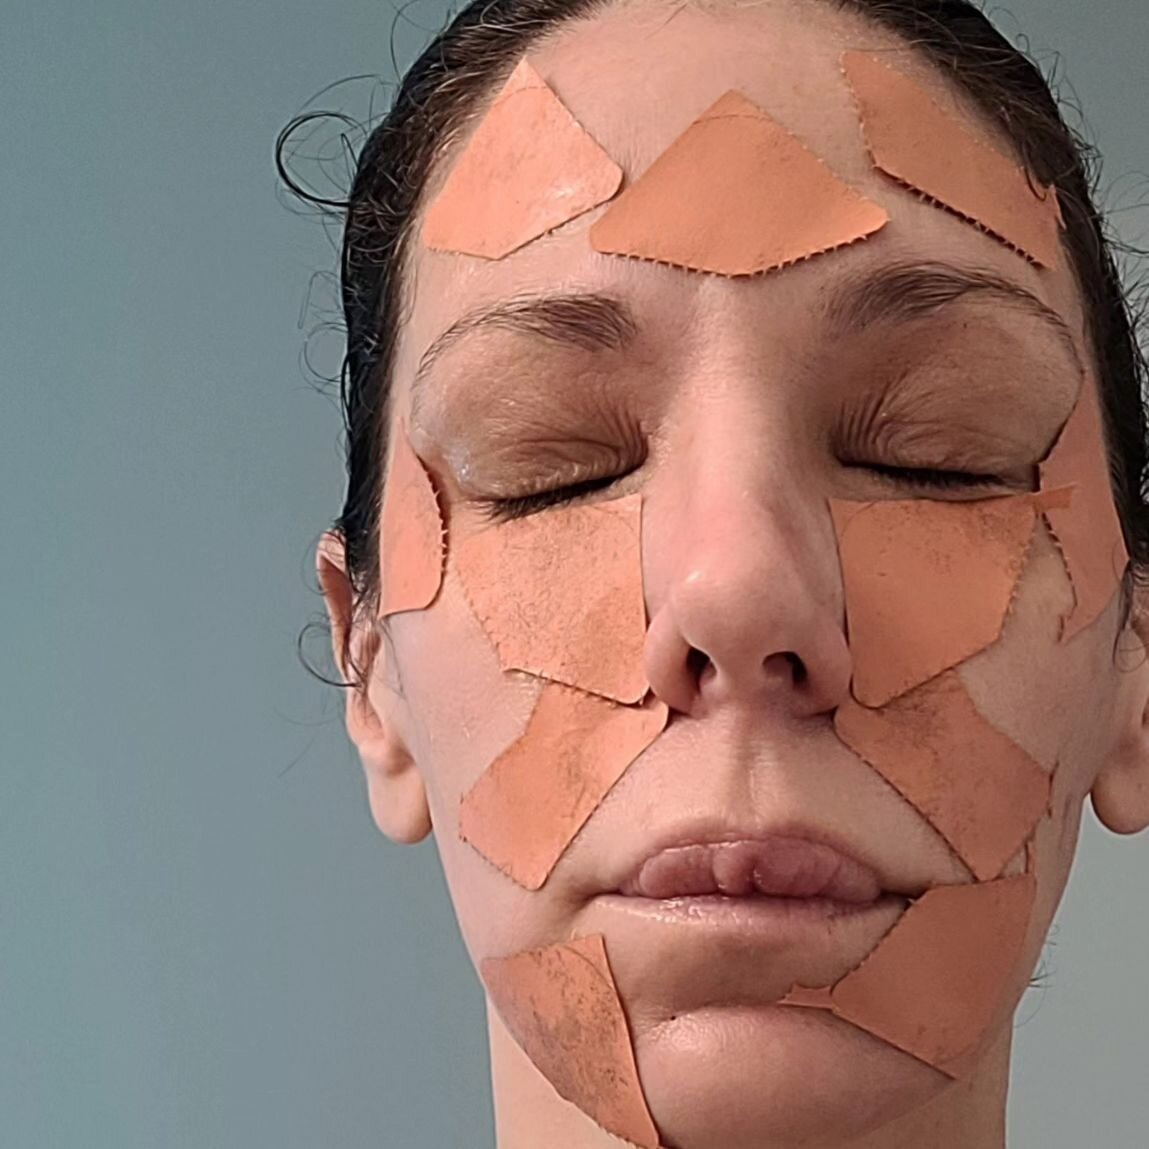 Face taping is an amazing tool to lessen the depth of wrinkles. At Laserboxx weemploy mny methods to build collagen and elastin to decrease wrinkles and fine lines if you are interested in face taping or how to achieve more collagen production withou